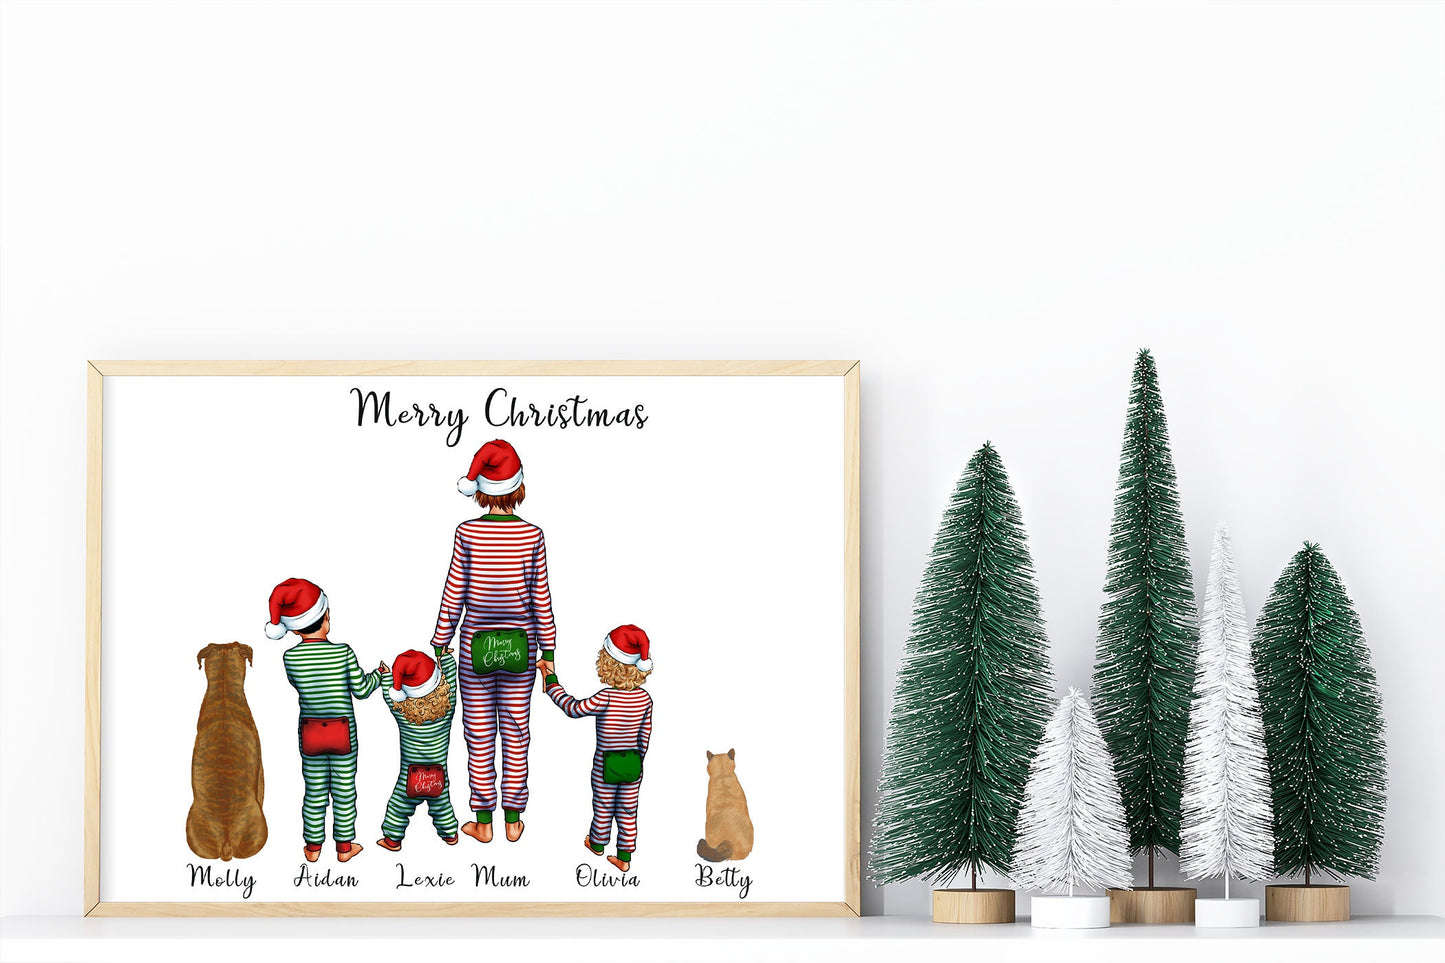 Customisable Family Christmas Pyjama Photo Print – Cherish the festive moments with matching PJ's and treasured pet| A4 | A5 | Greeting card